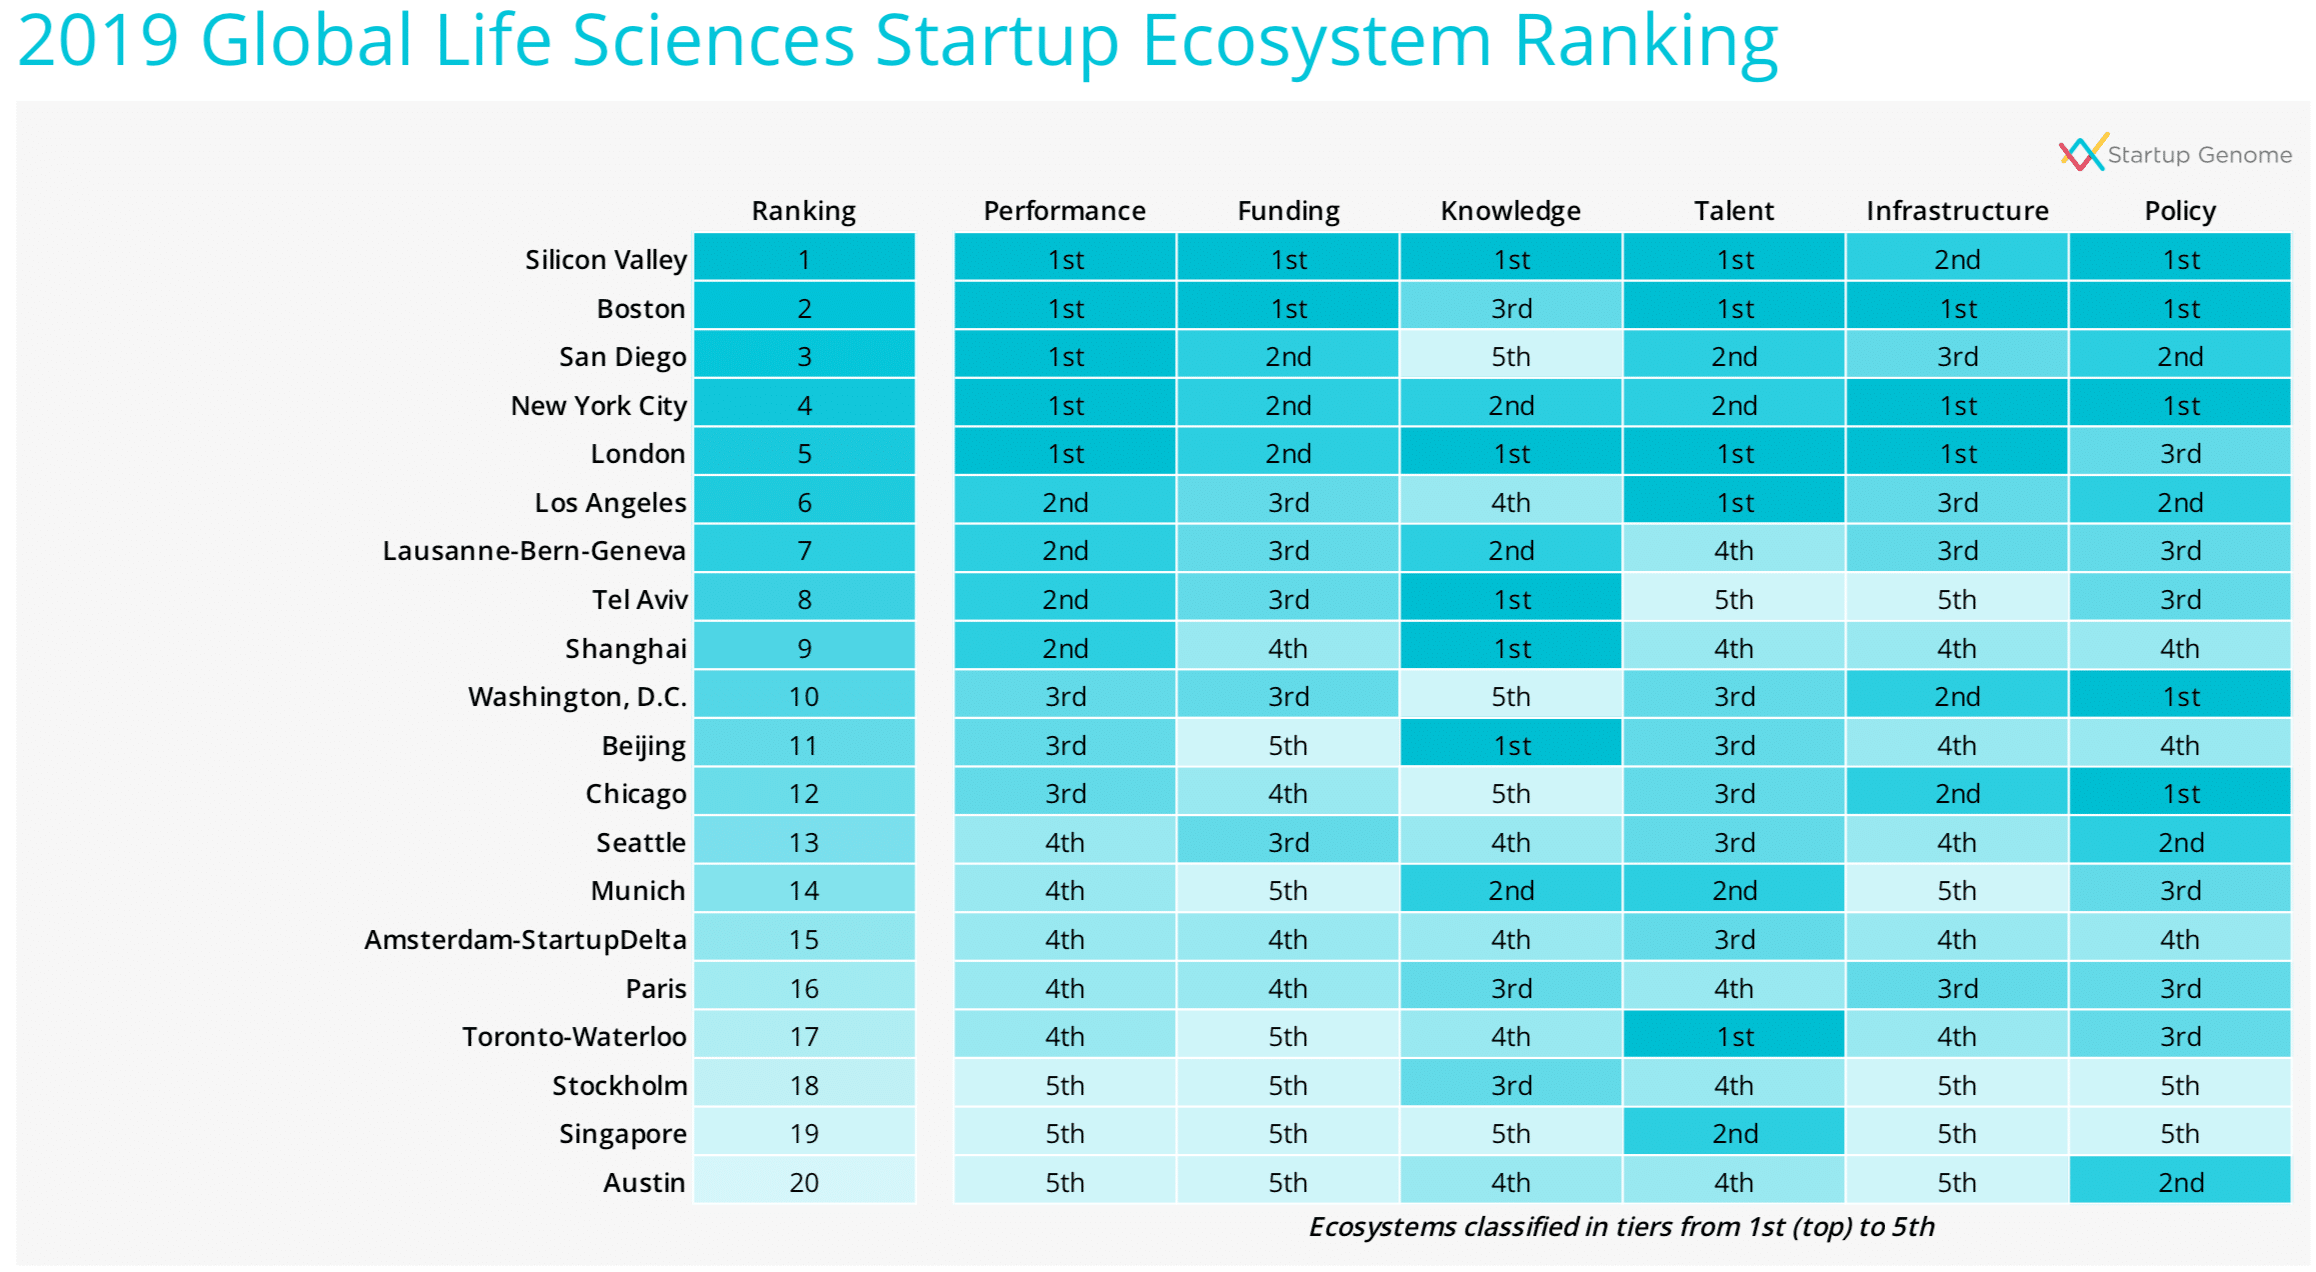 2019 Global Life Sciences Startup Ecosystem Ranking: Startup Genome Report